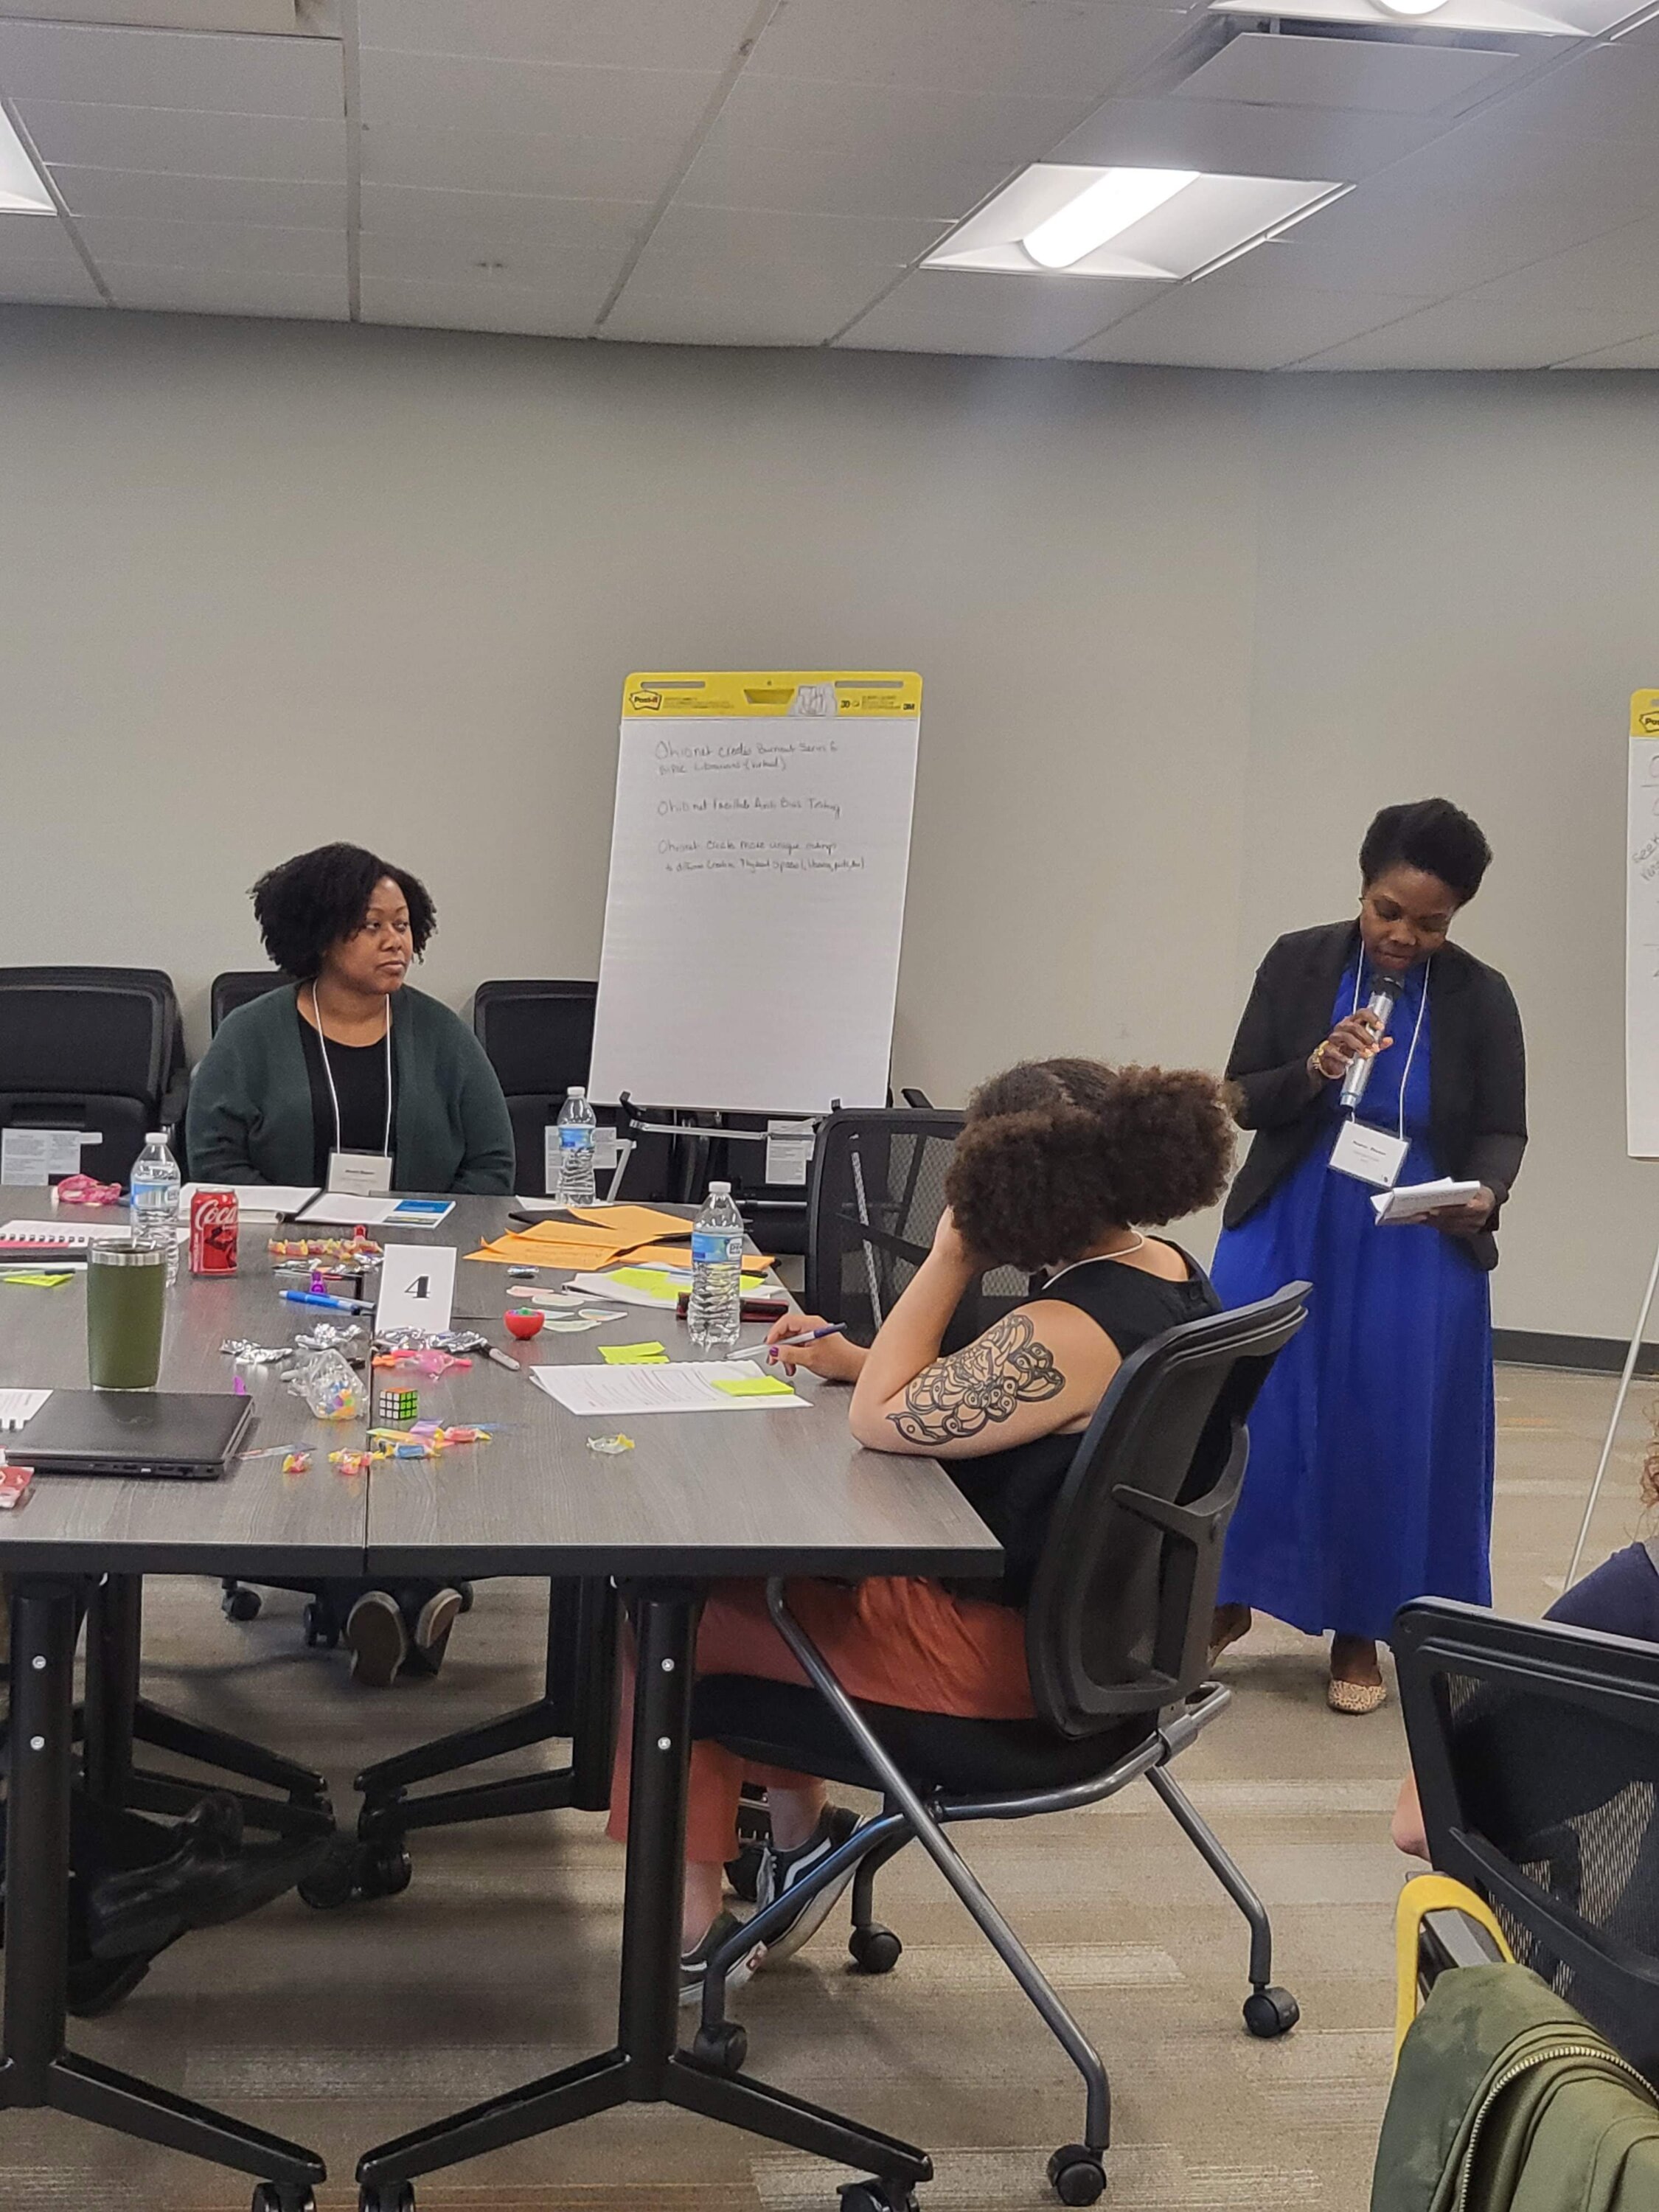 Desiree Thomas (pictured standing), Youth Services Librarian at Worthington Libraries, facilitates discussion and shares ideas for creating inclusion in Ohio libraries.